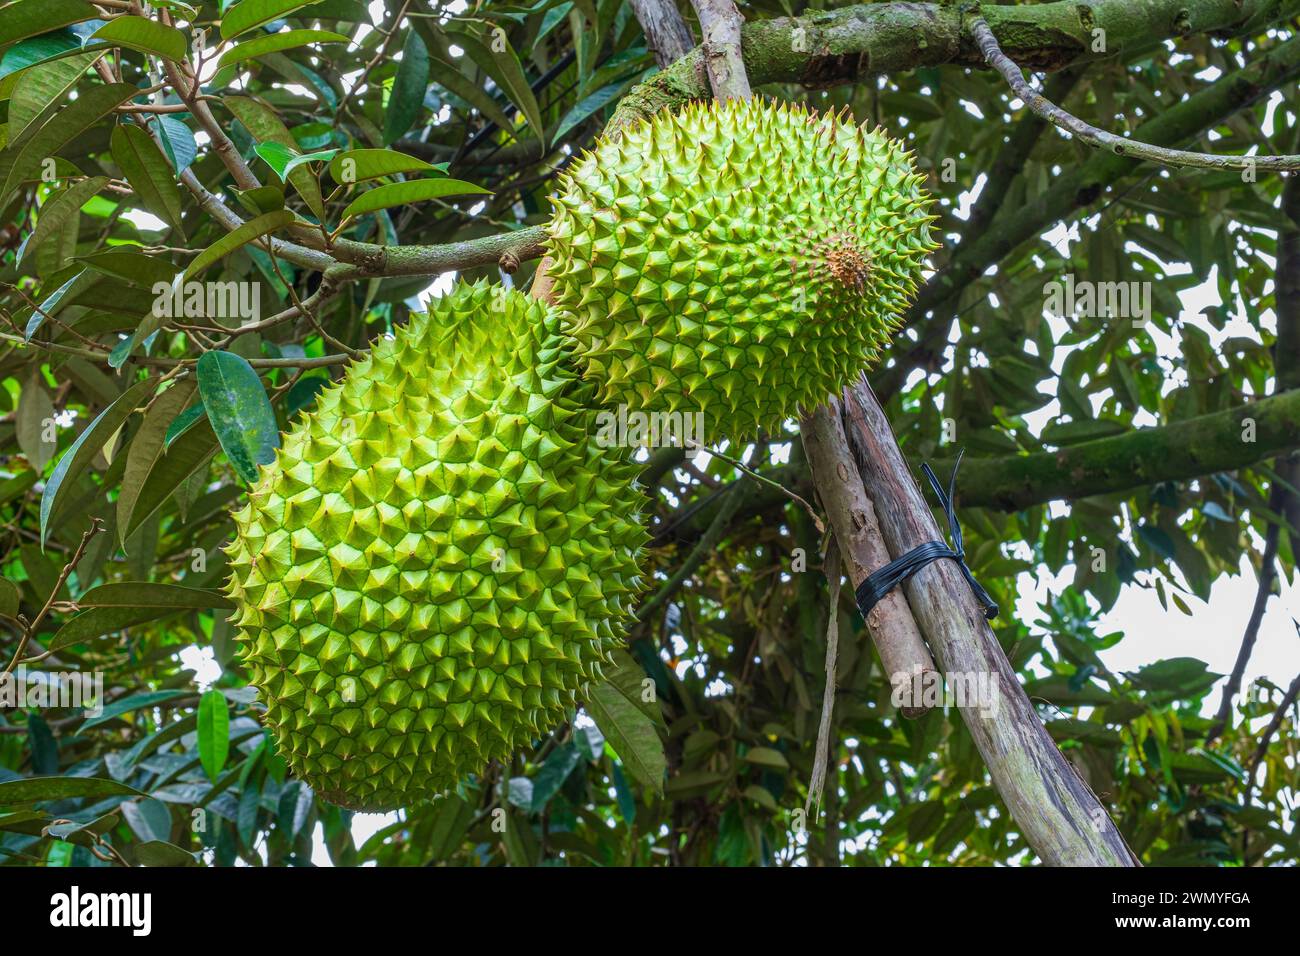 Vietnam, Mekong Delta, Tien Giang province, Tan Phong island, cultivation of durians Stock Photo